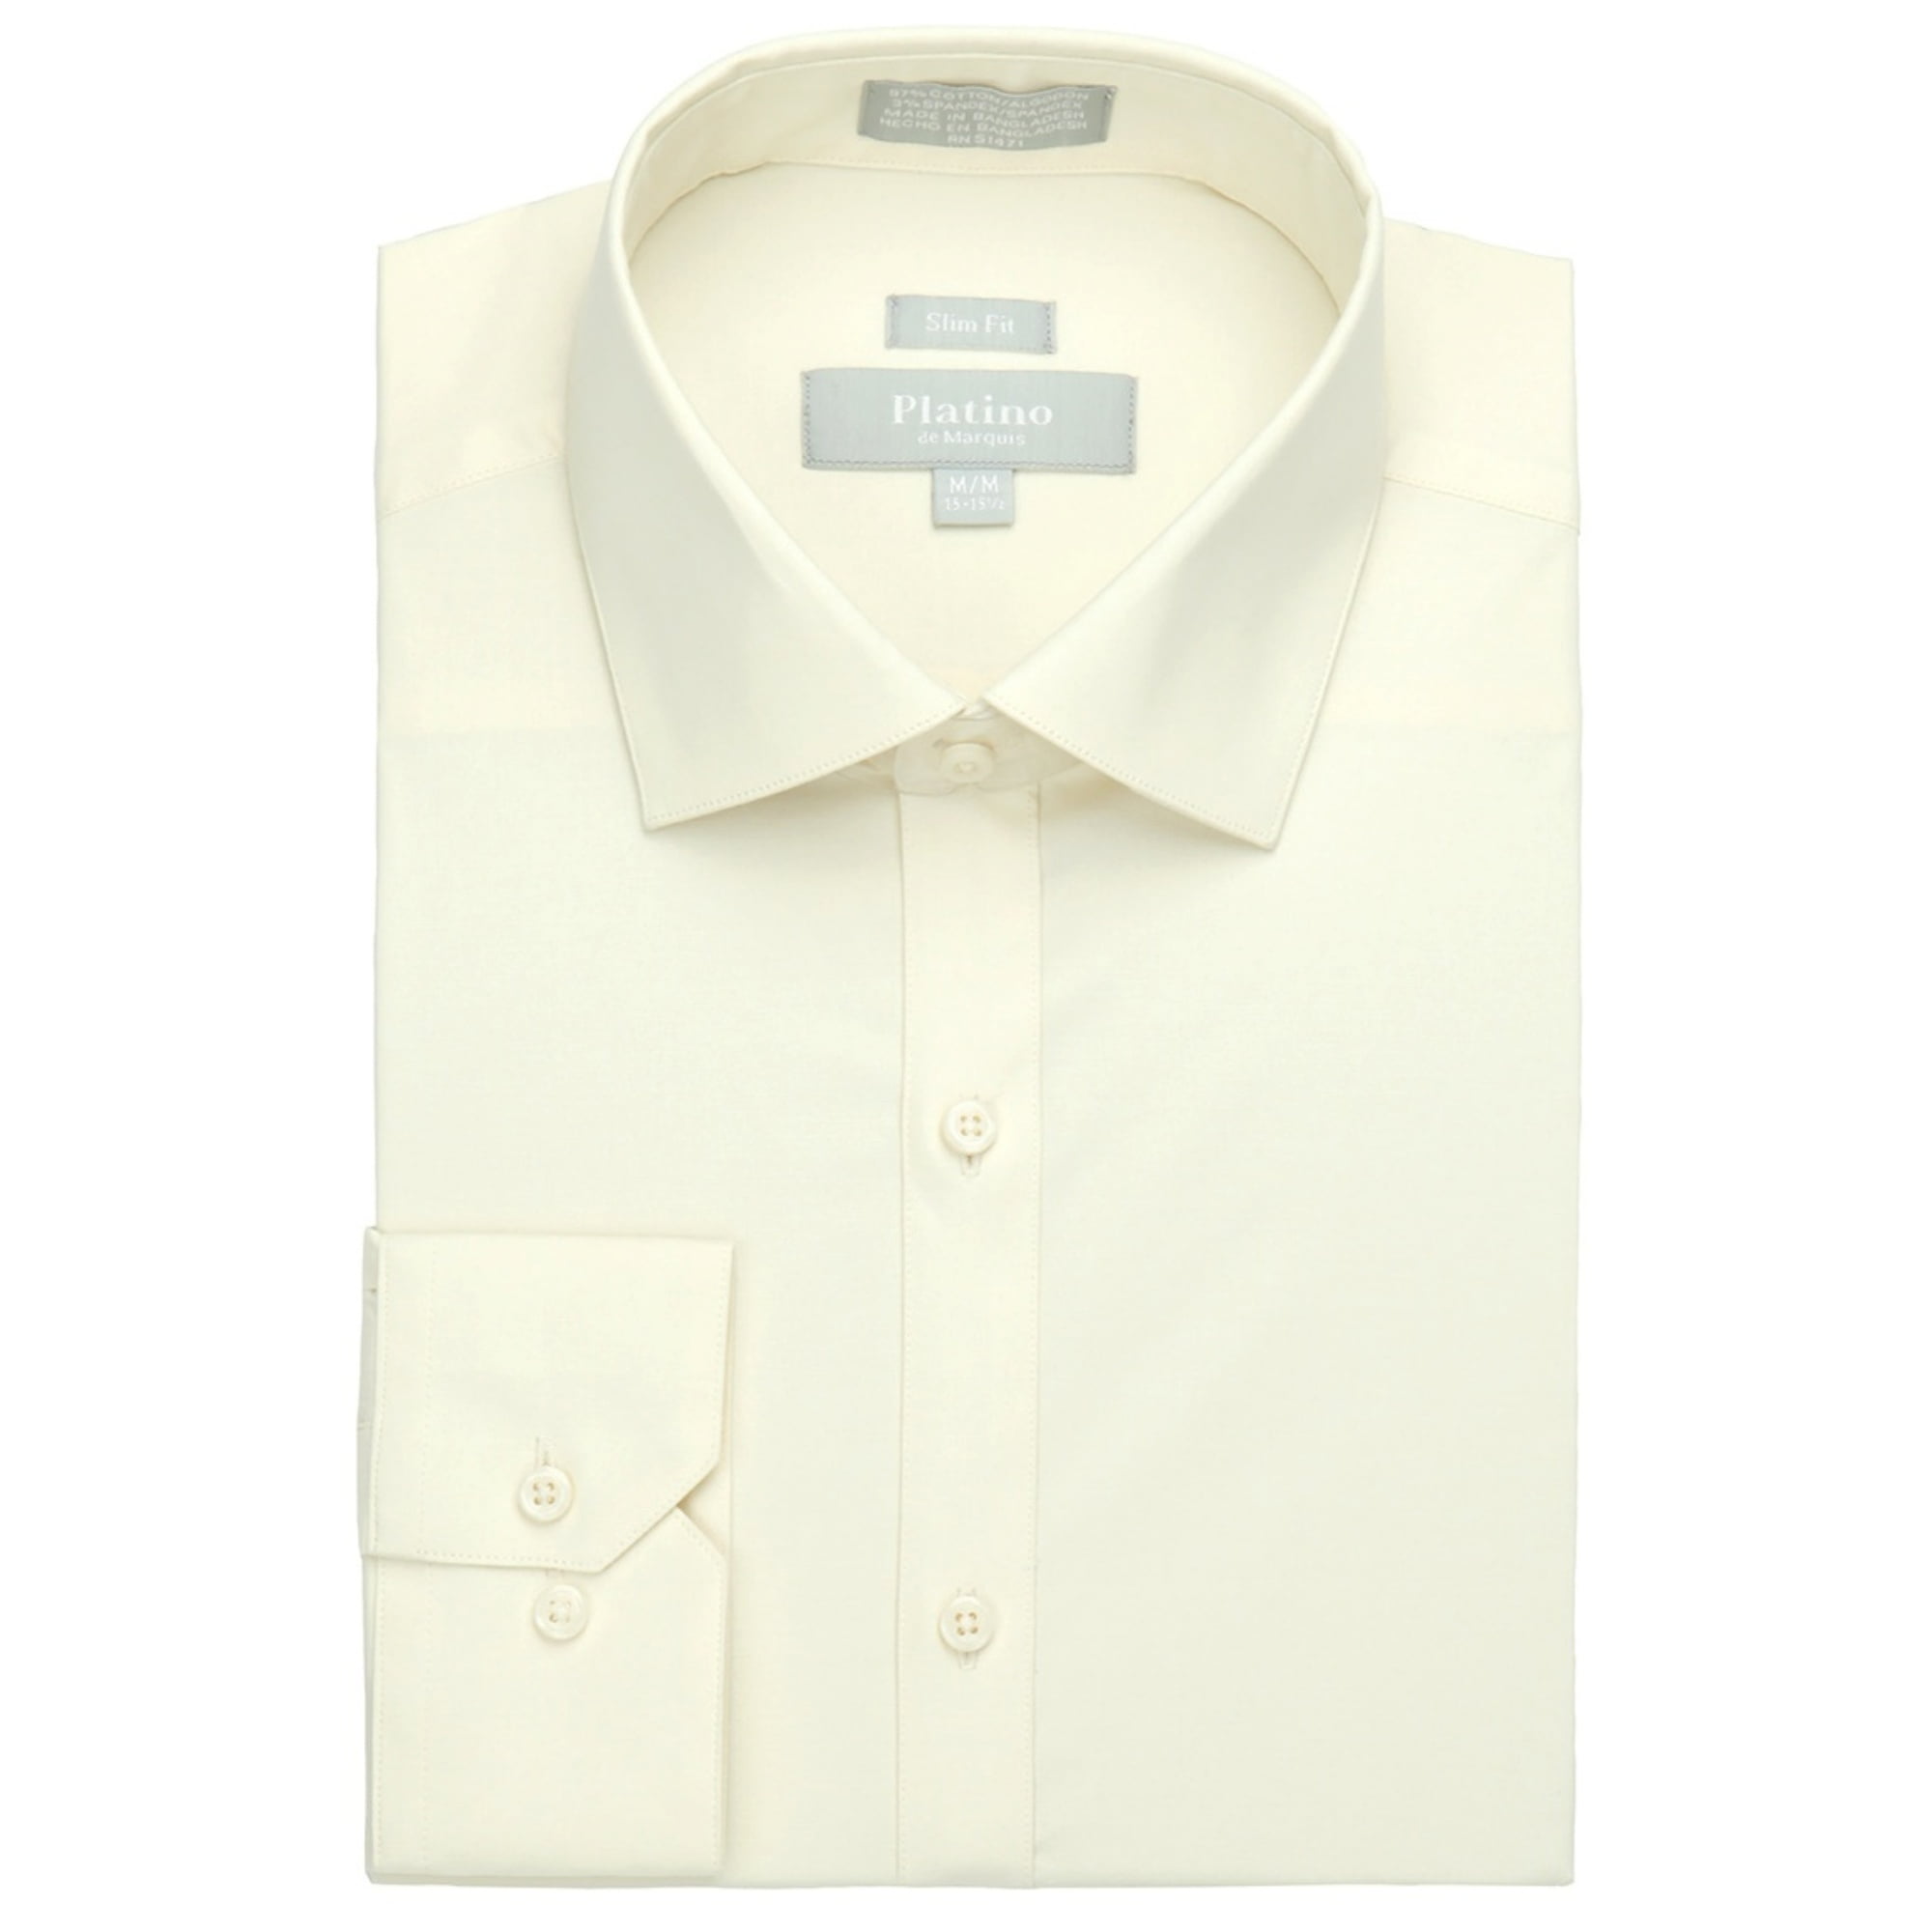 Men's Ivory Off White Slim Fit Spandex Dress Shirt From Marquis Size - L  16.5, 34-35